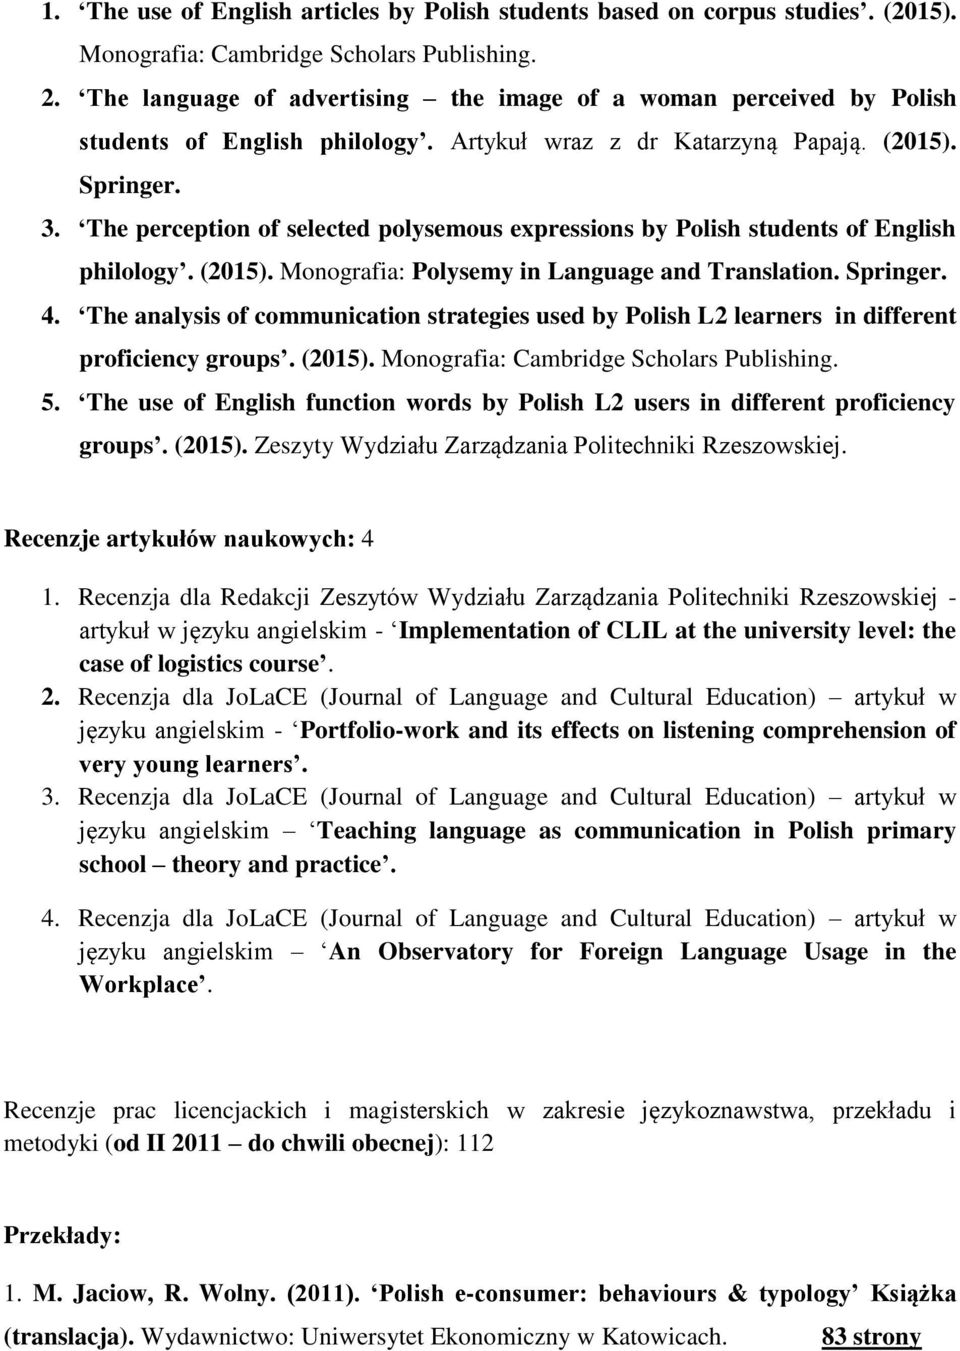 The perception of selected polysemous expressions by Polish students of English philology. (2015). Monografia: Polysemy in Language and Translation. Springer. 4.